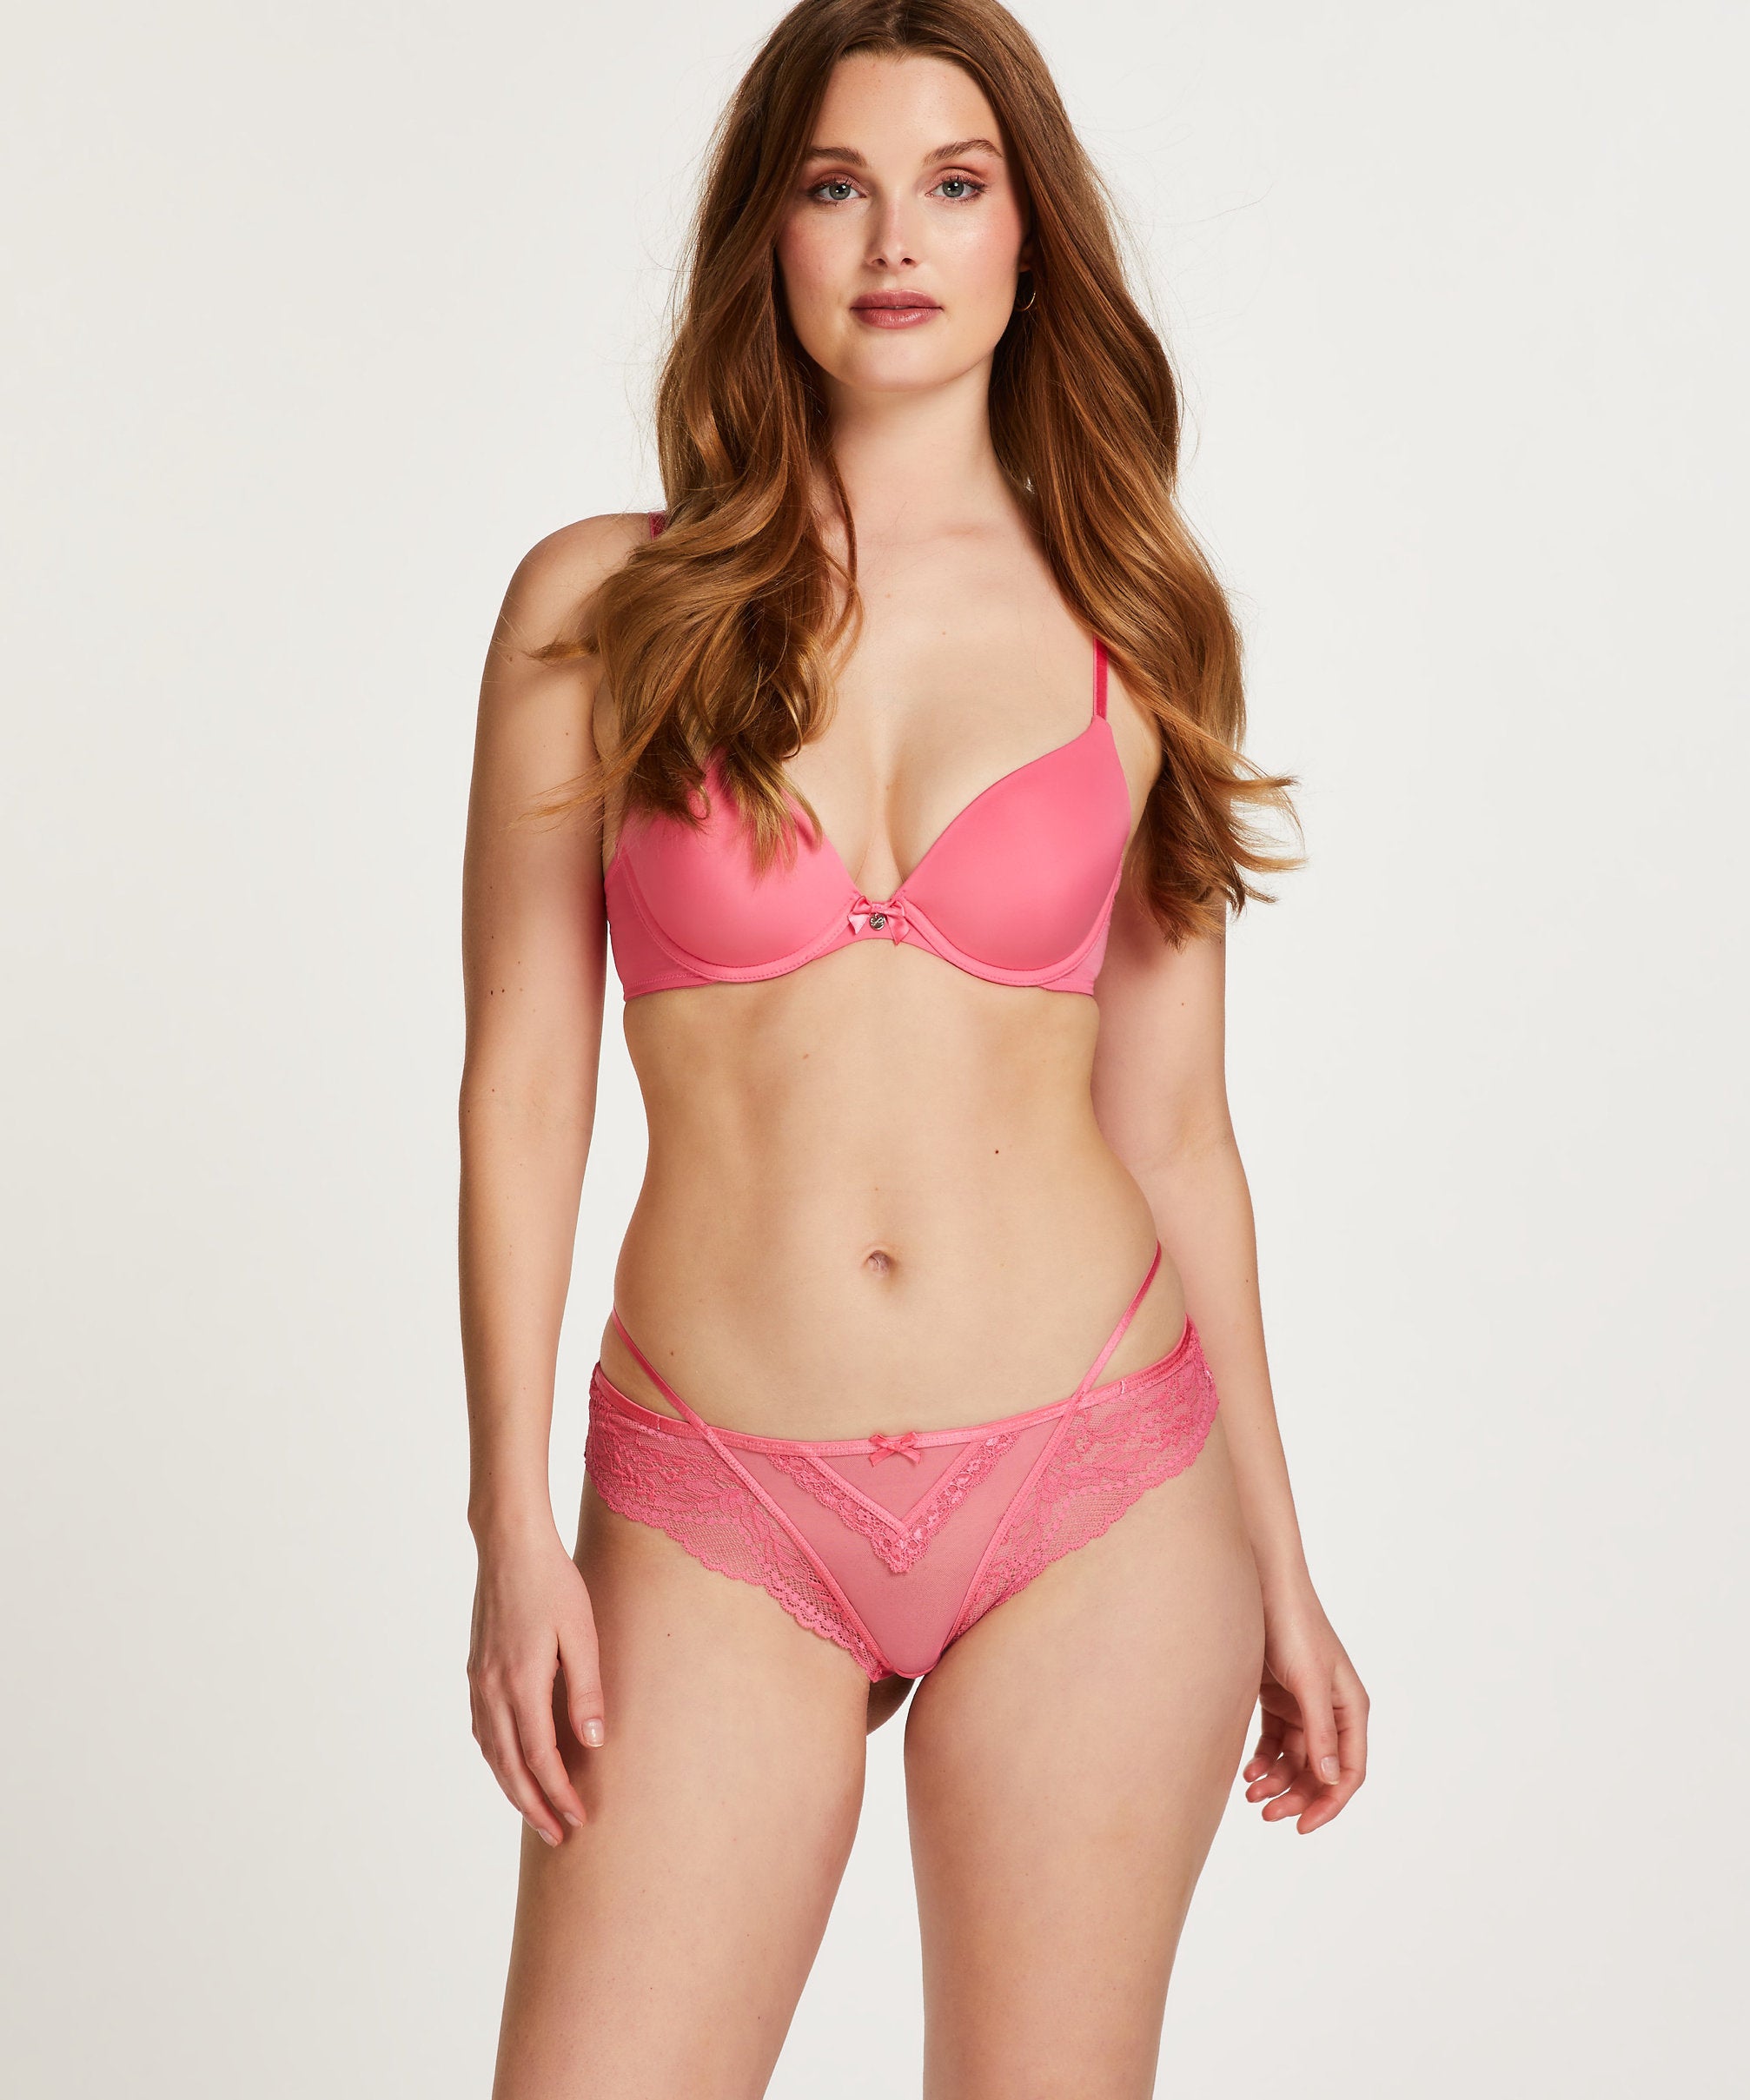 P&amp;M Push Up Bra In Different Cup Sizes_202080_Hot Pink_04